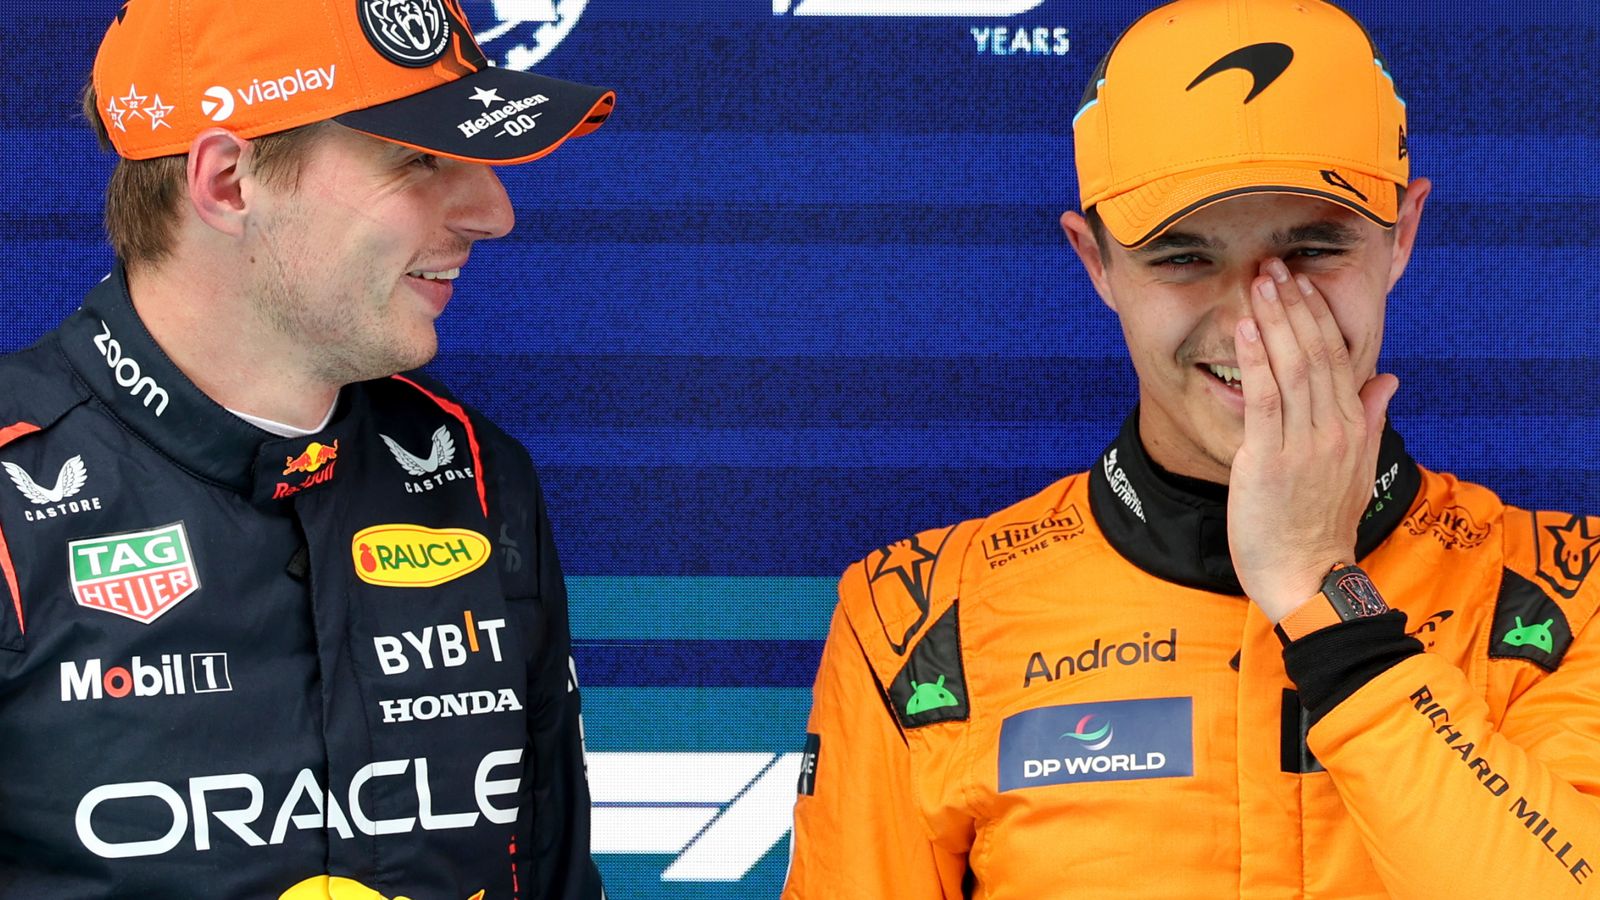 Lando Norris identified as most 'consistent challenger' to Max Verstappen by Red Bull ahead of Austrian GP